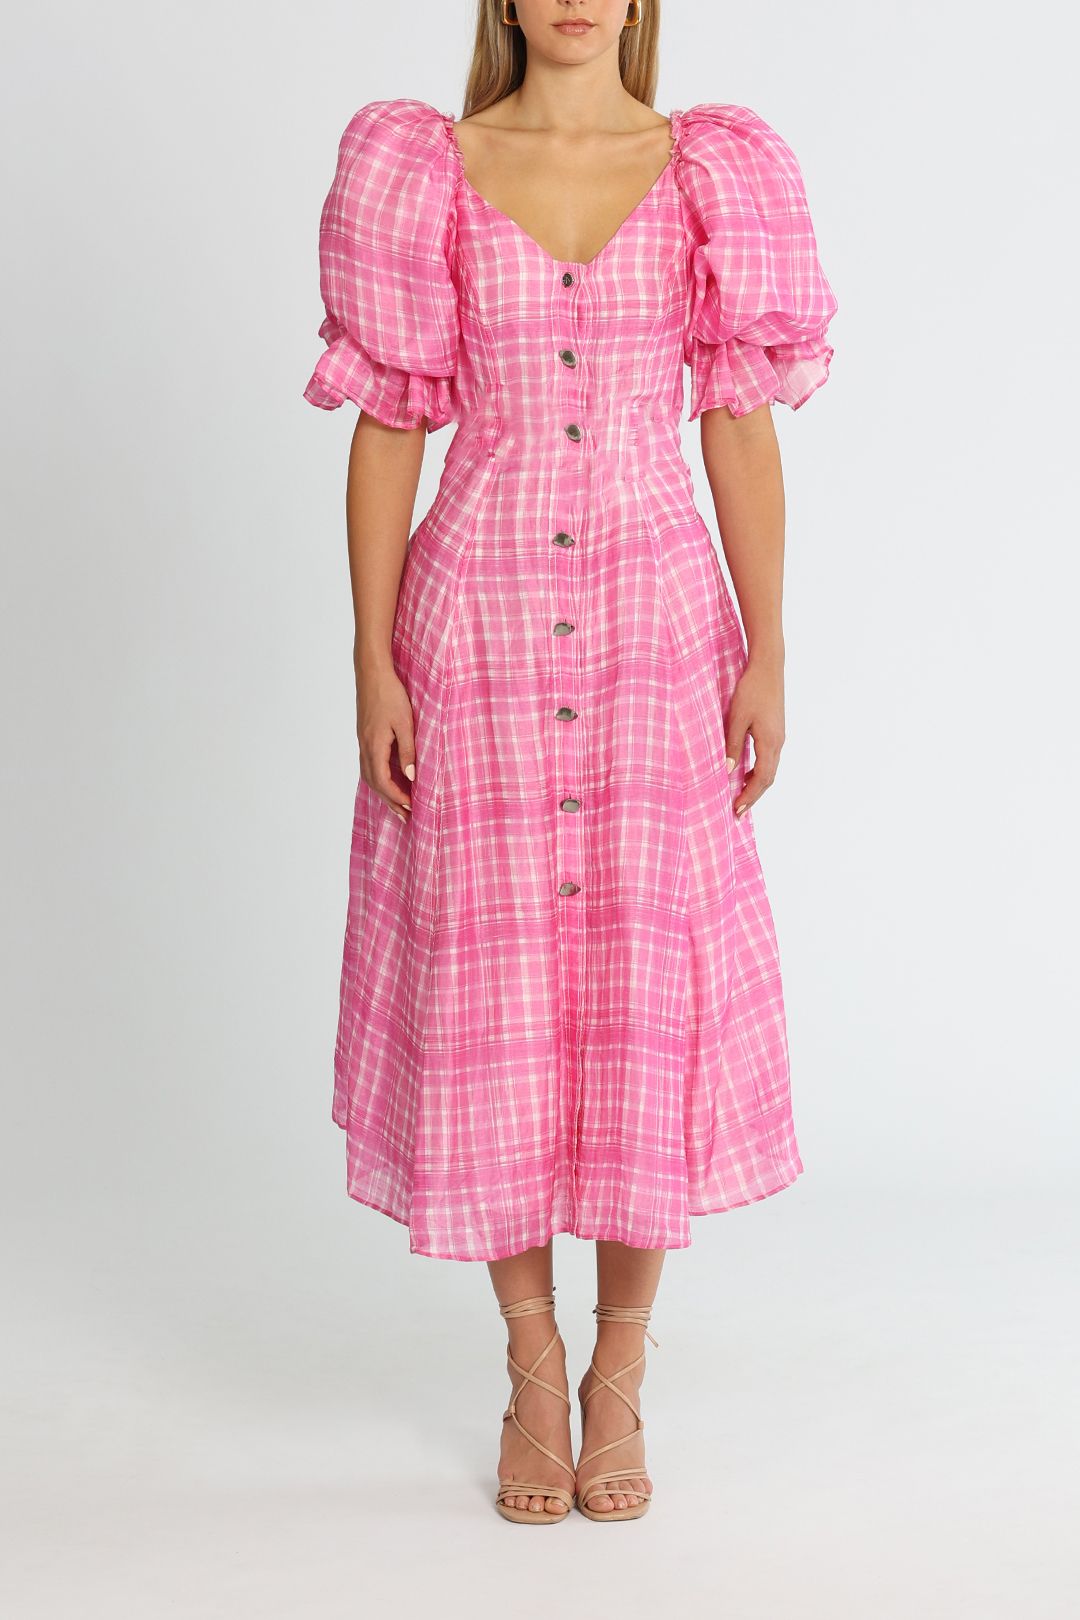 AJE Bungalow Puff Sleeve Dress Pink Check